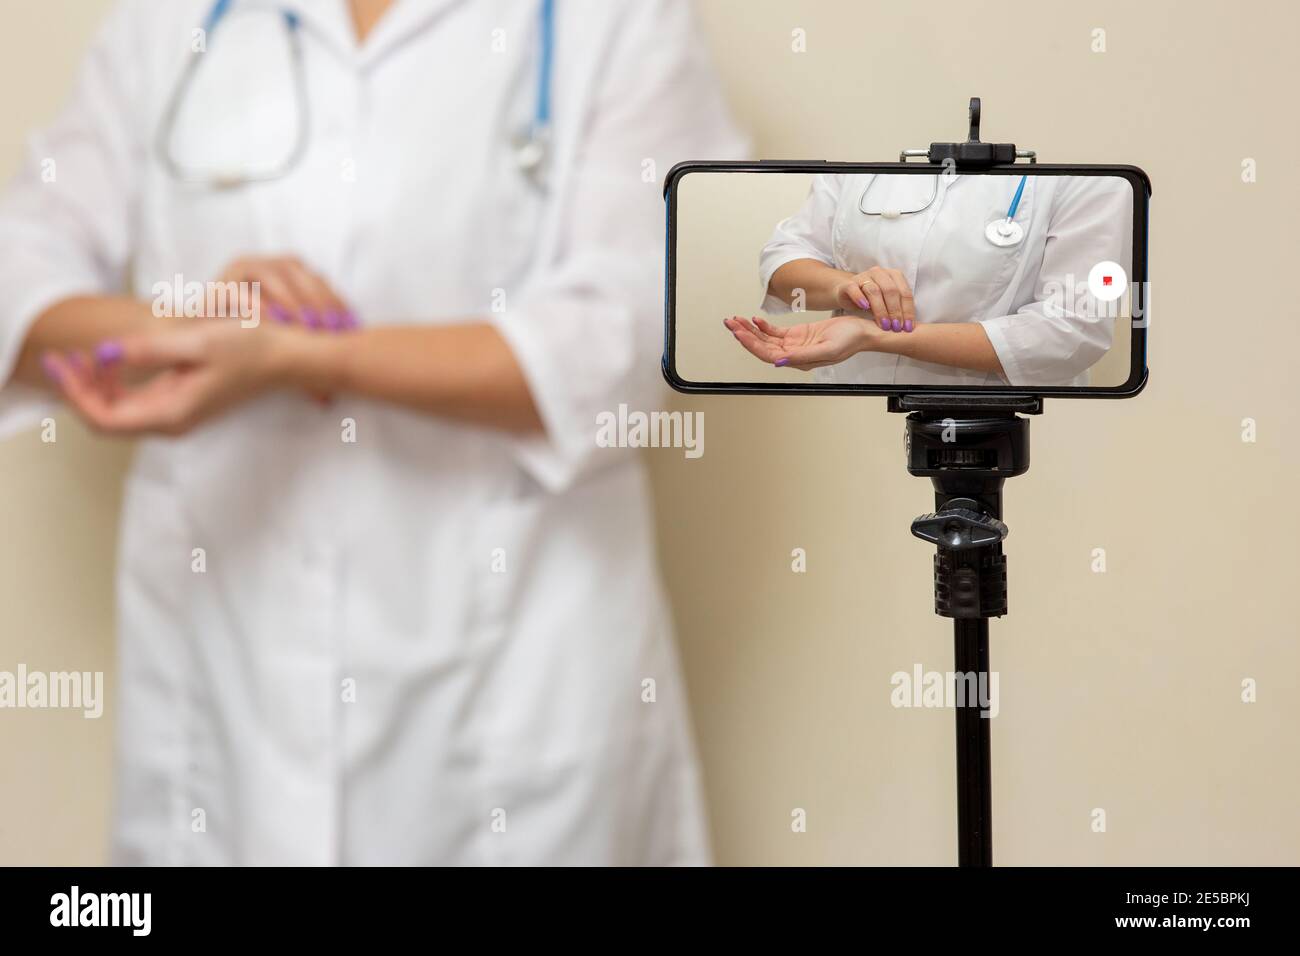 A woman doctor records a video on a smartphone, how to measure the pulse on her arm. Stock Photo